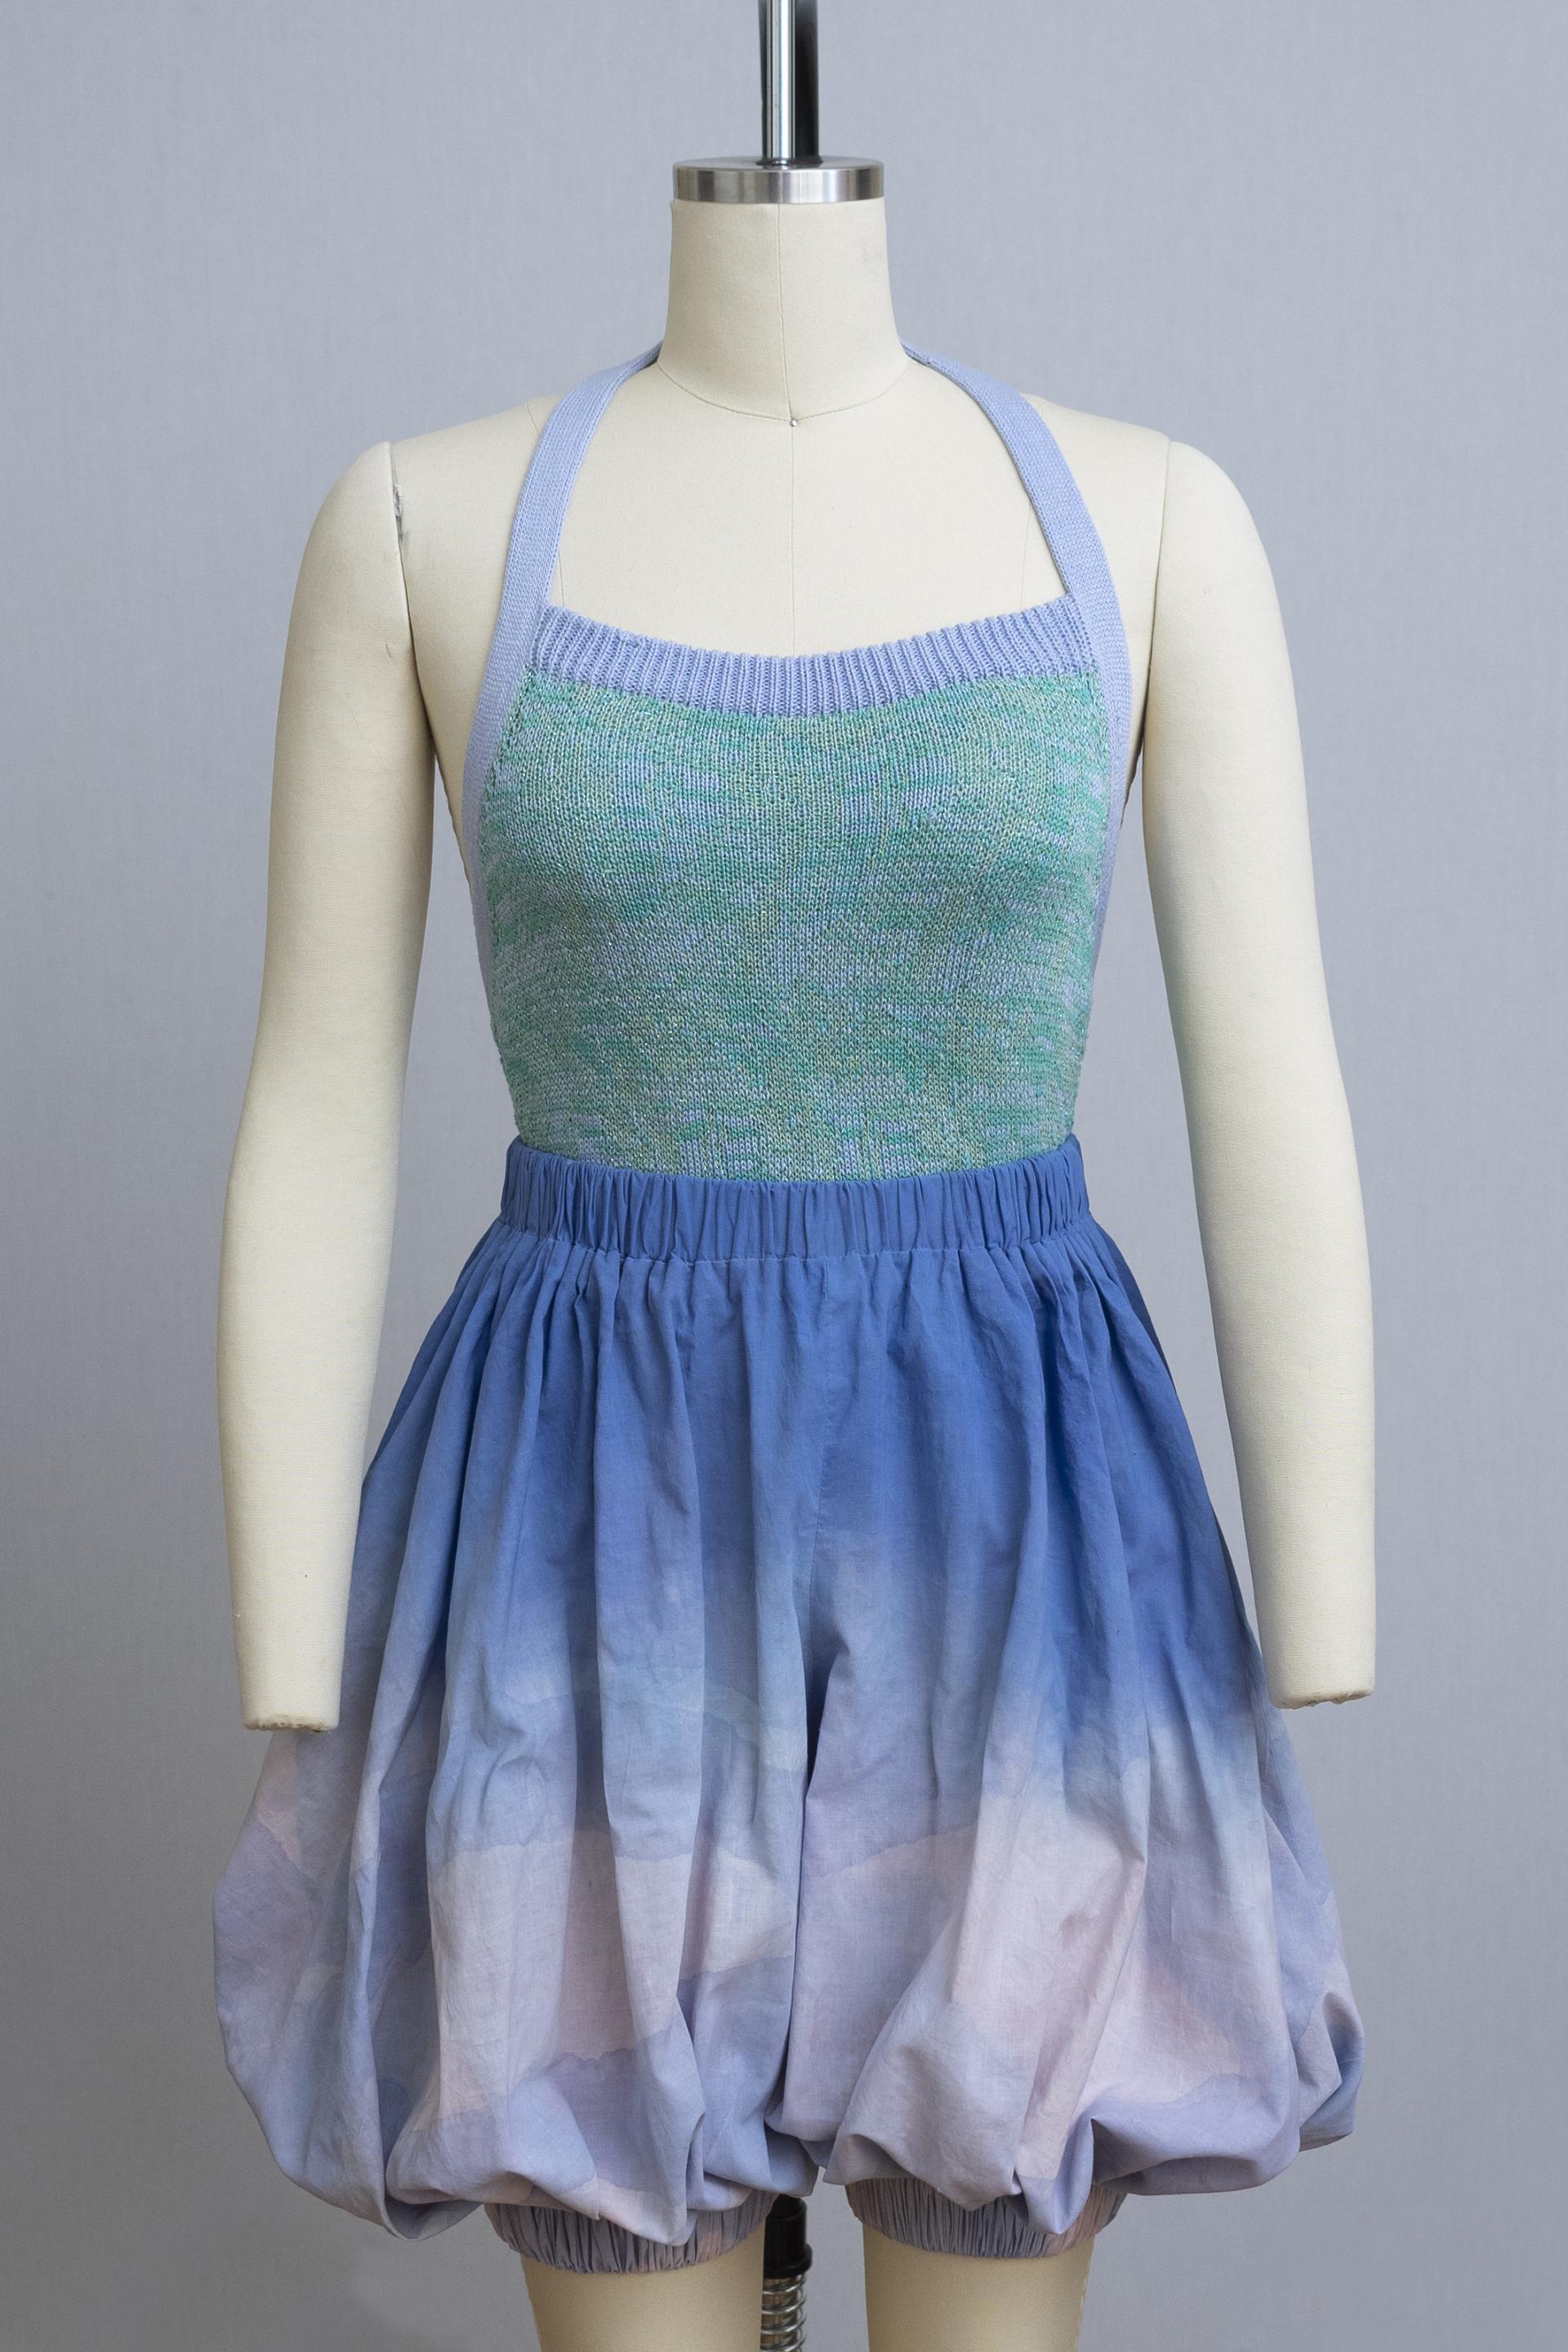 dress form wearing a knit playsuit and bloomers dyed in an ombre from blue to lavendar